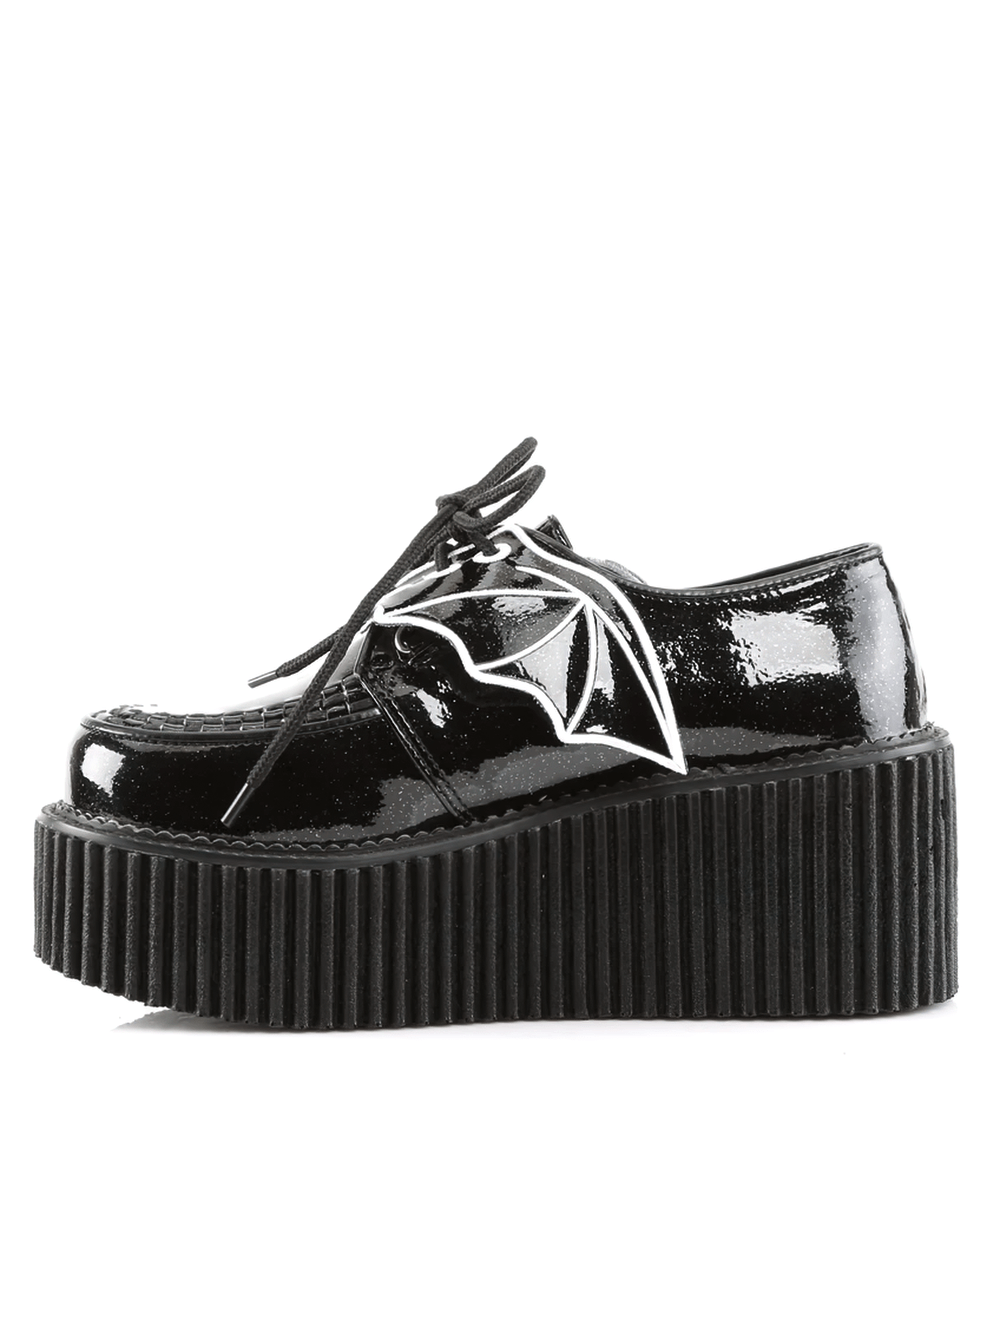 DEMONIA Black Glitter Creepers Shoes with Bat Wings